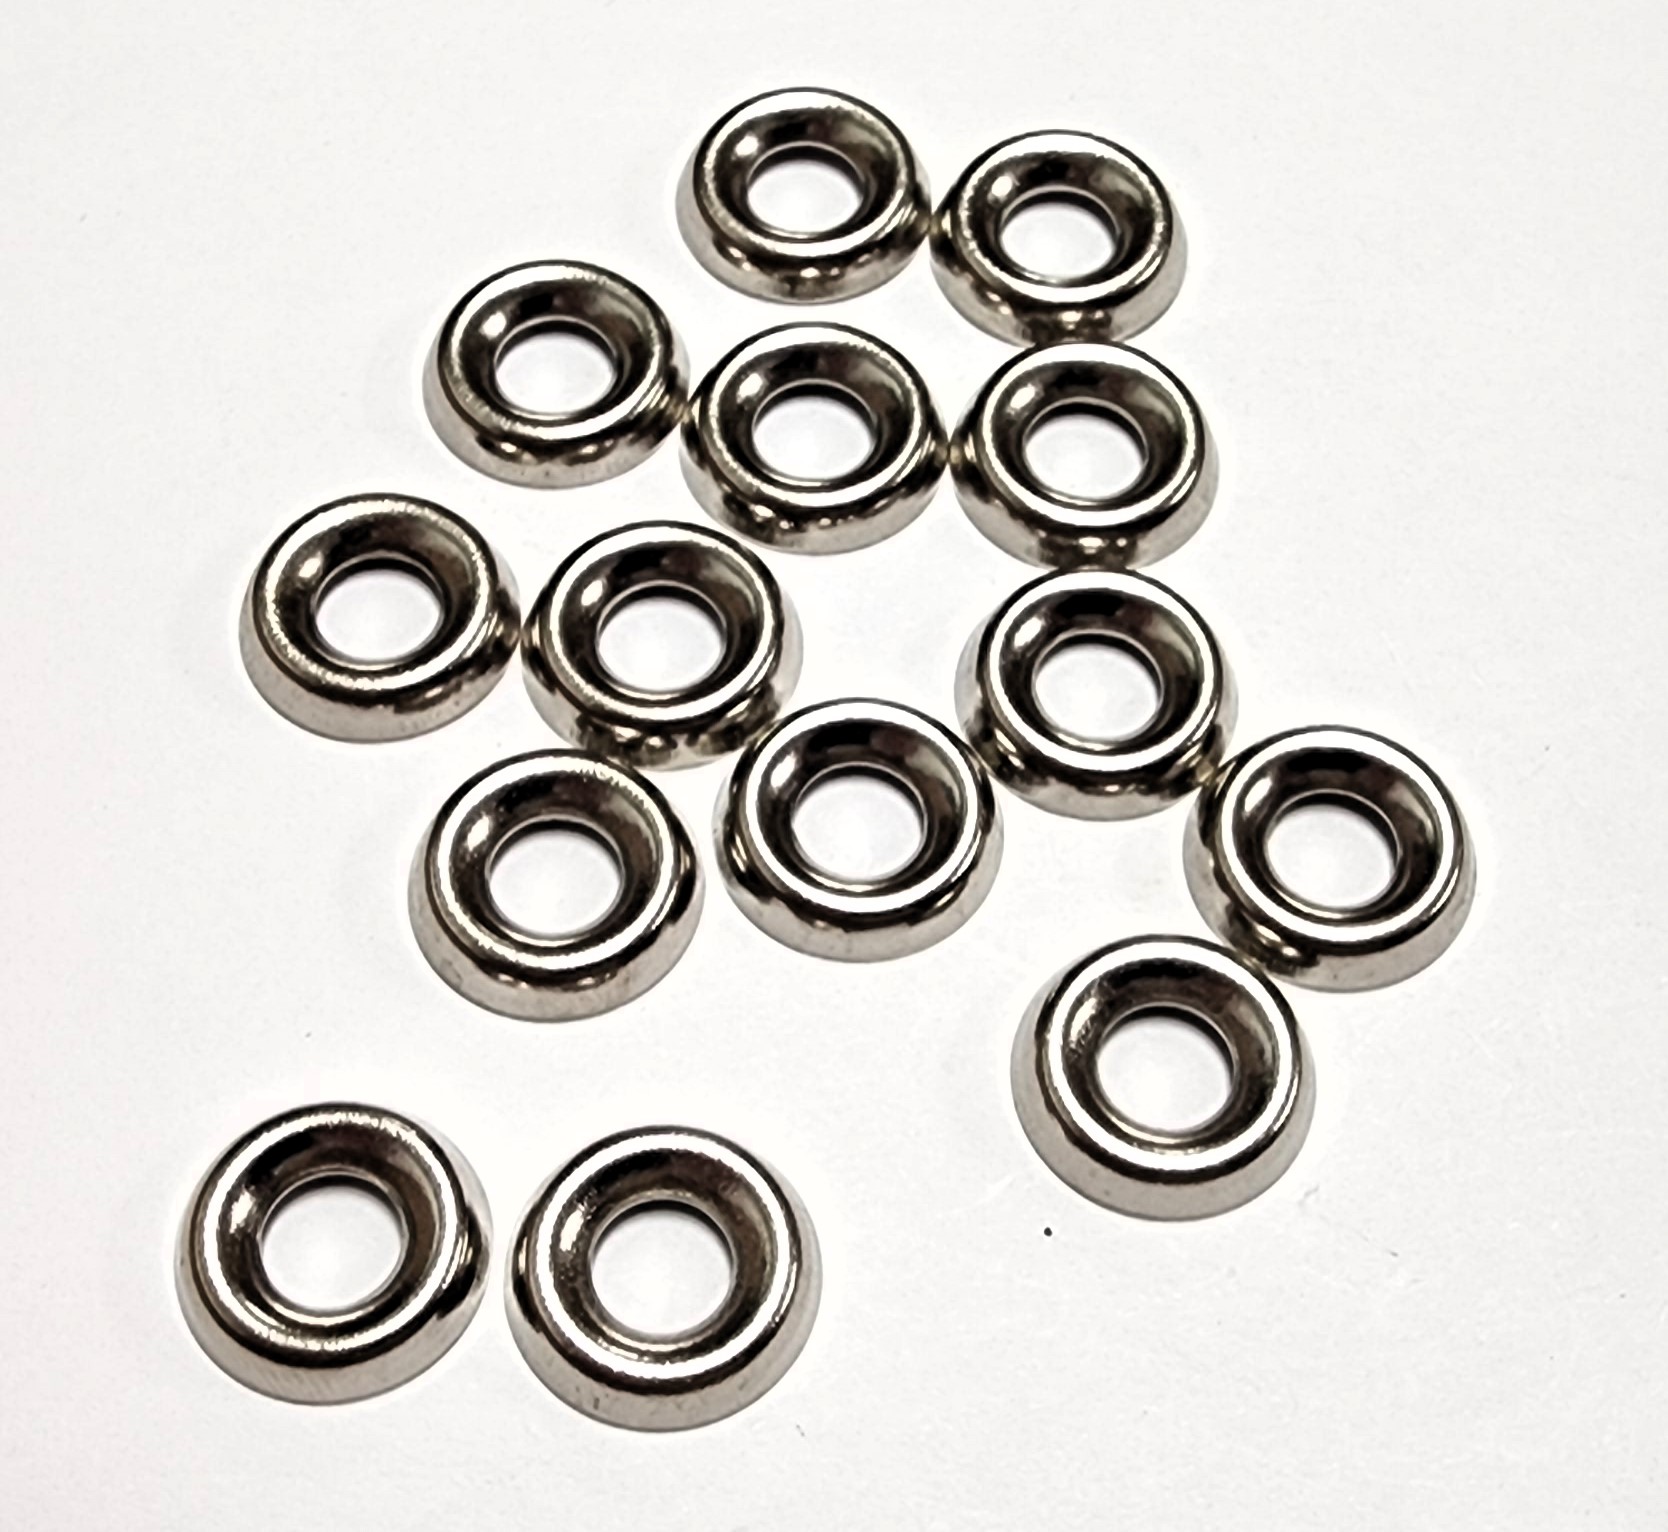 #10 FINISHING CUP WASHER - NICKEL-PLATED (14 PACK) - Kilrich Building Centres